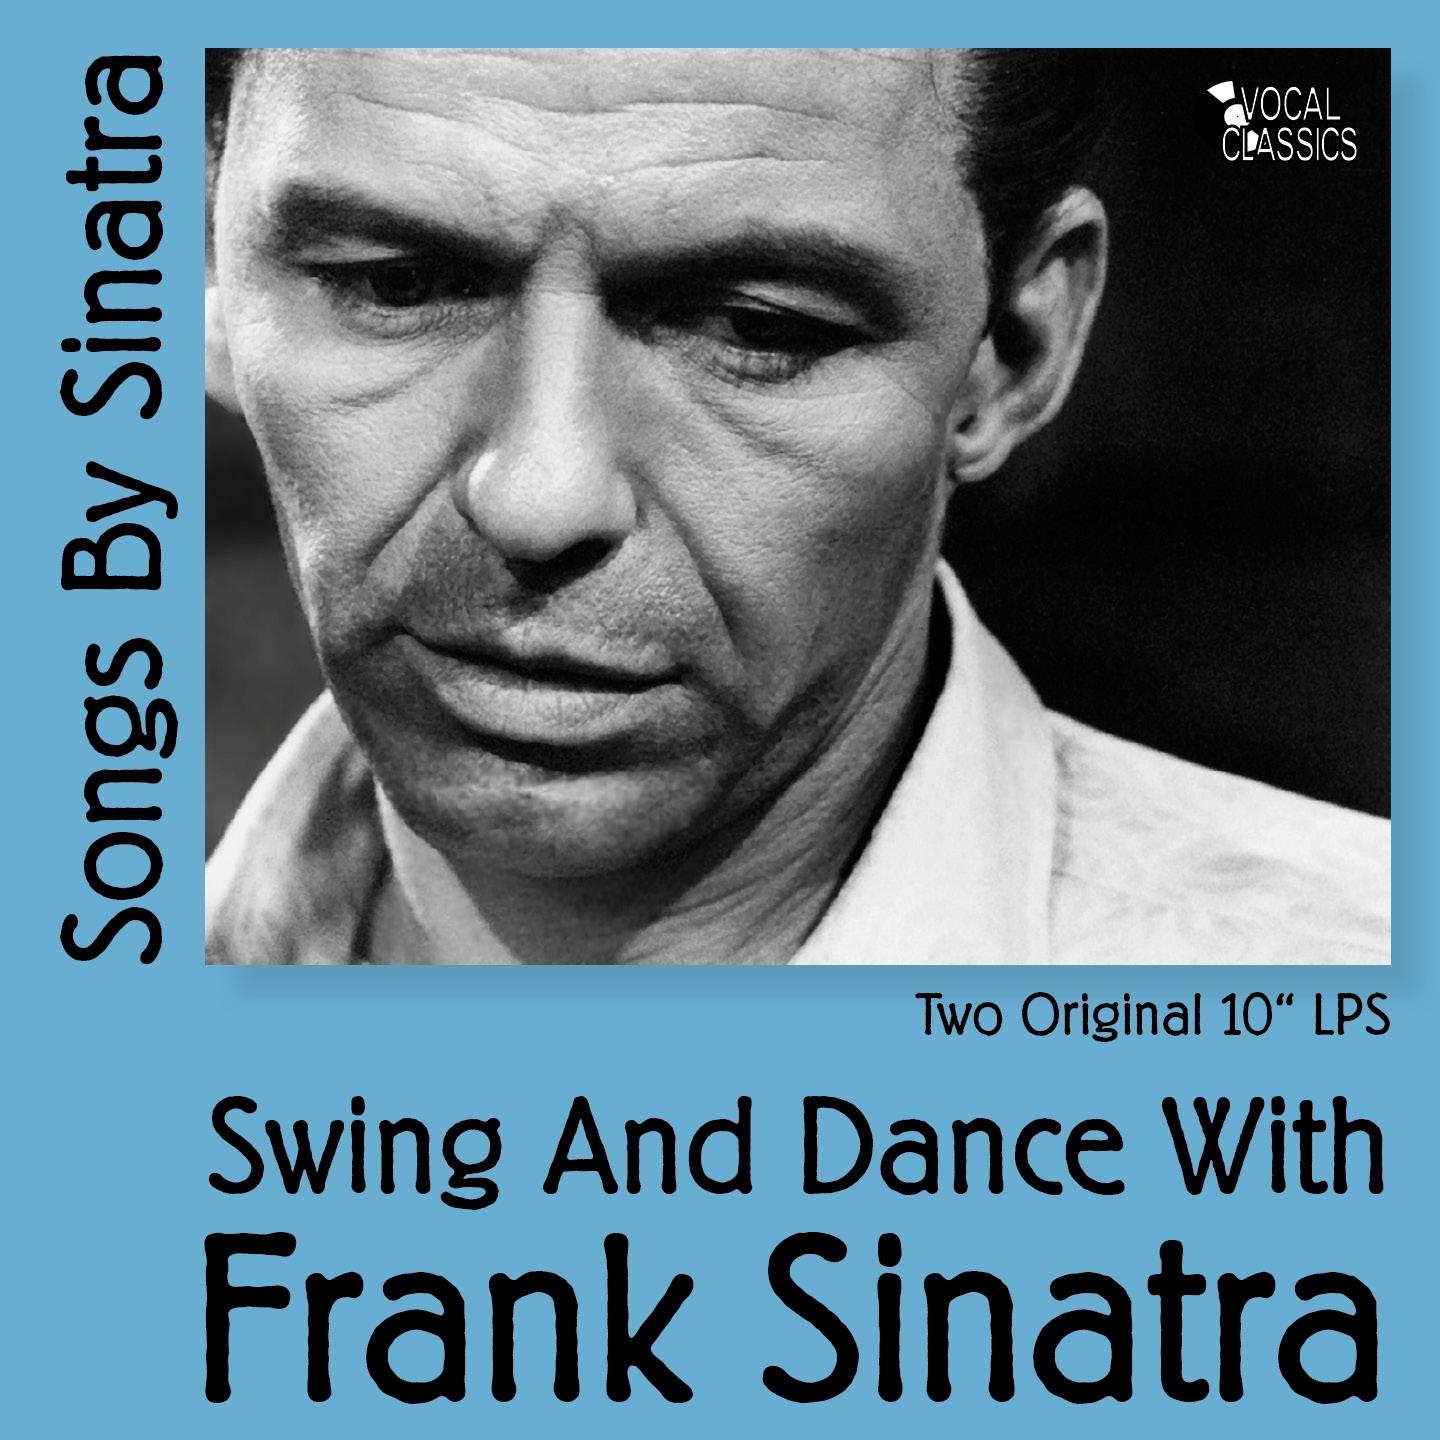 Songs By Sinatra - Swing and Dance With Frank Sinatra